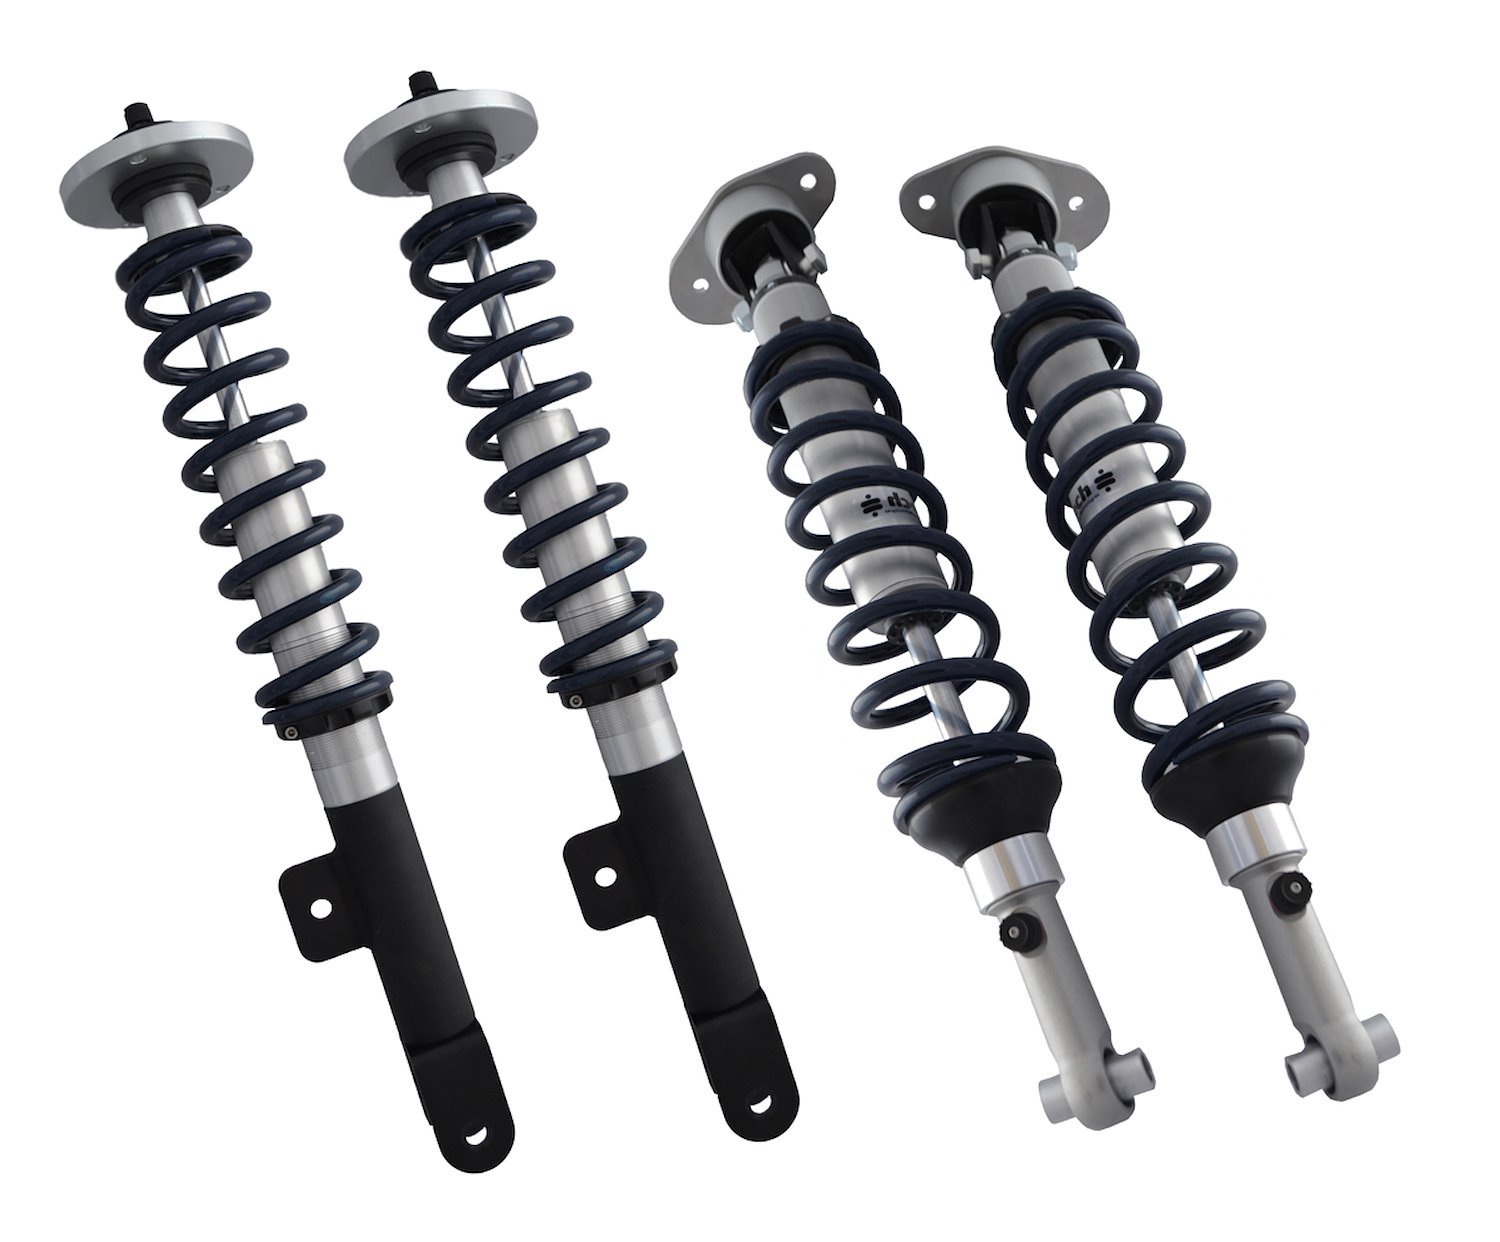 Level 2 CoilOver System for 04-up Charger Challenger 300C and Magnum. Includes front and rear HQ Series CoilOvers.